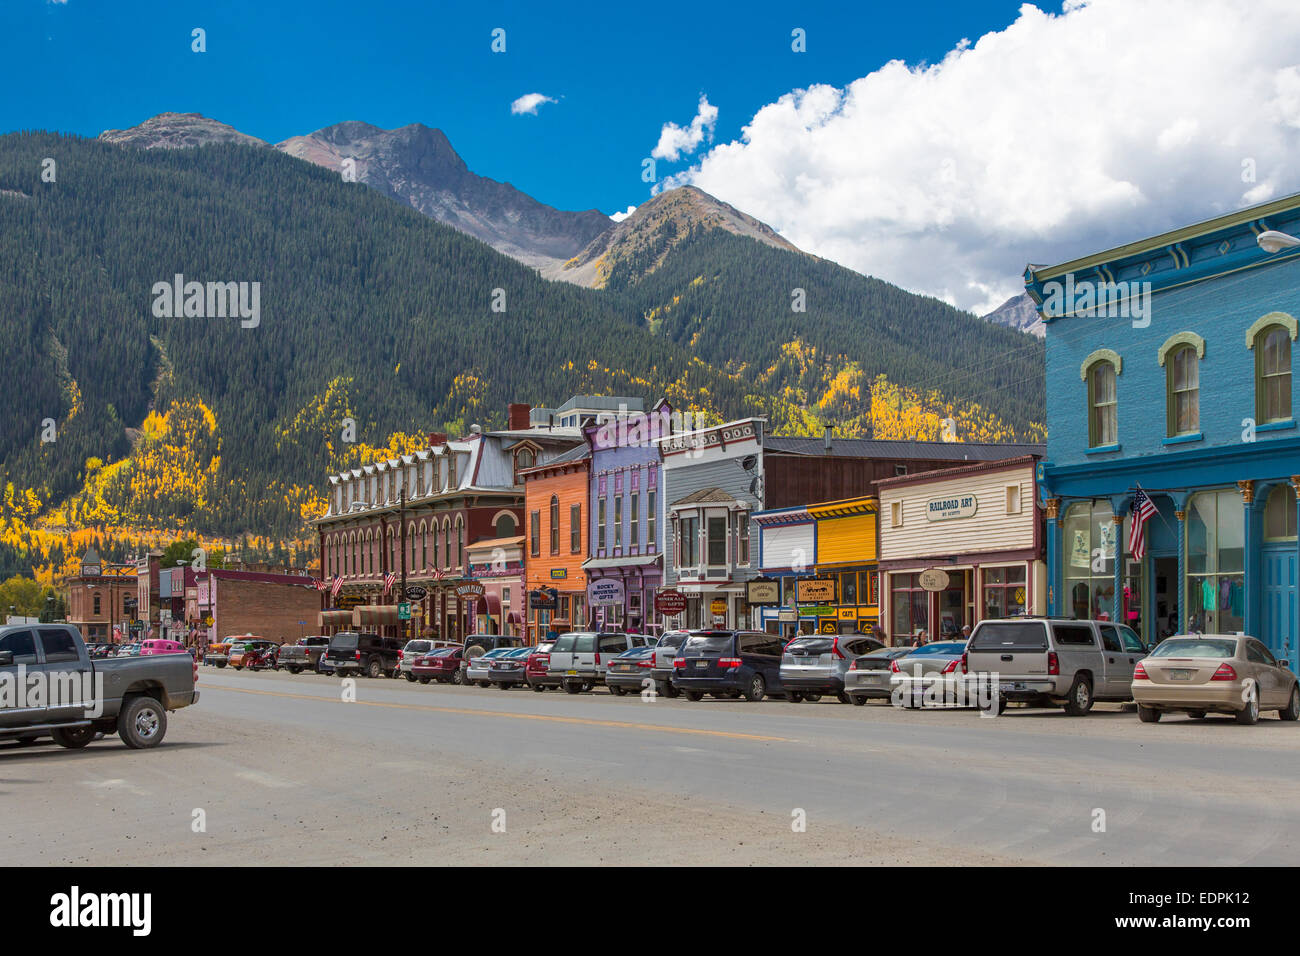 Historic old town of Silverton in The San Juan Mountains of Colorado Stock Photo